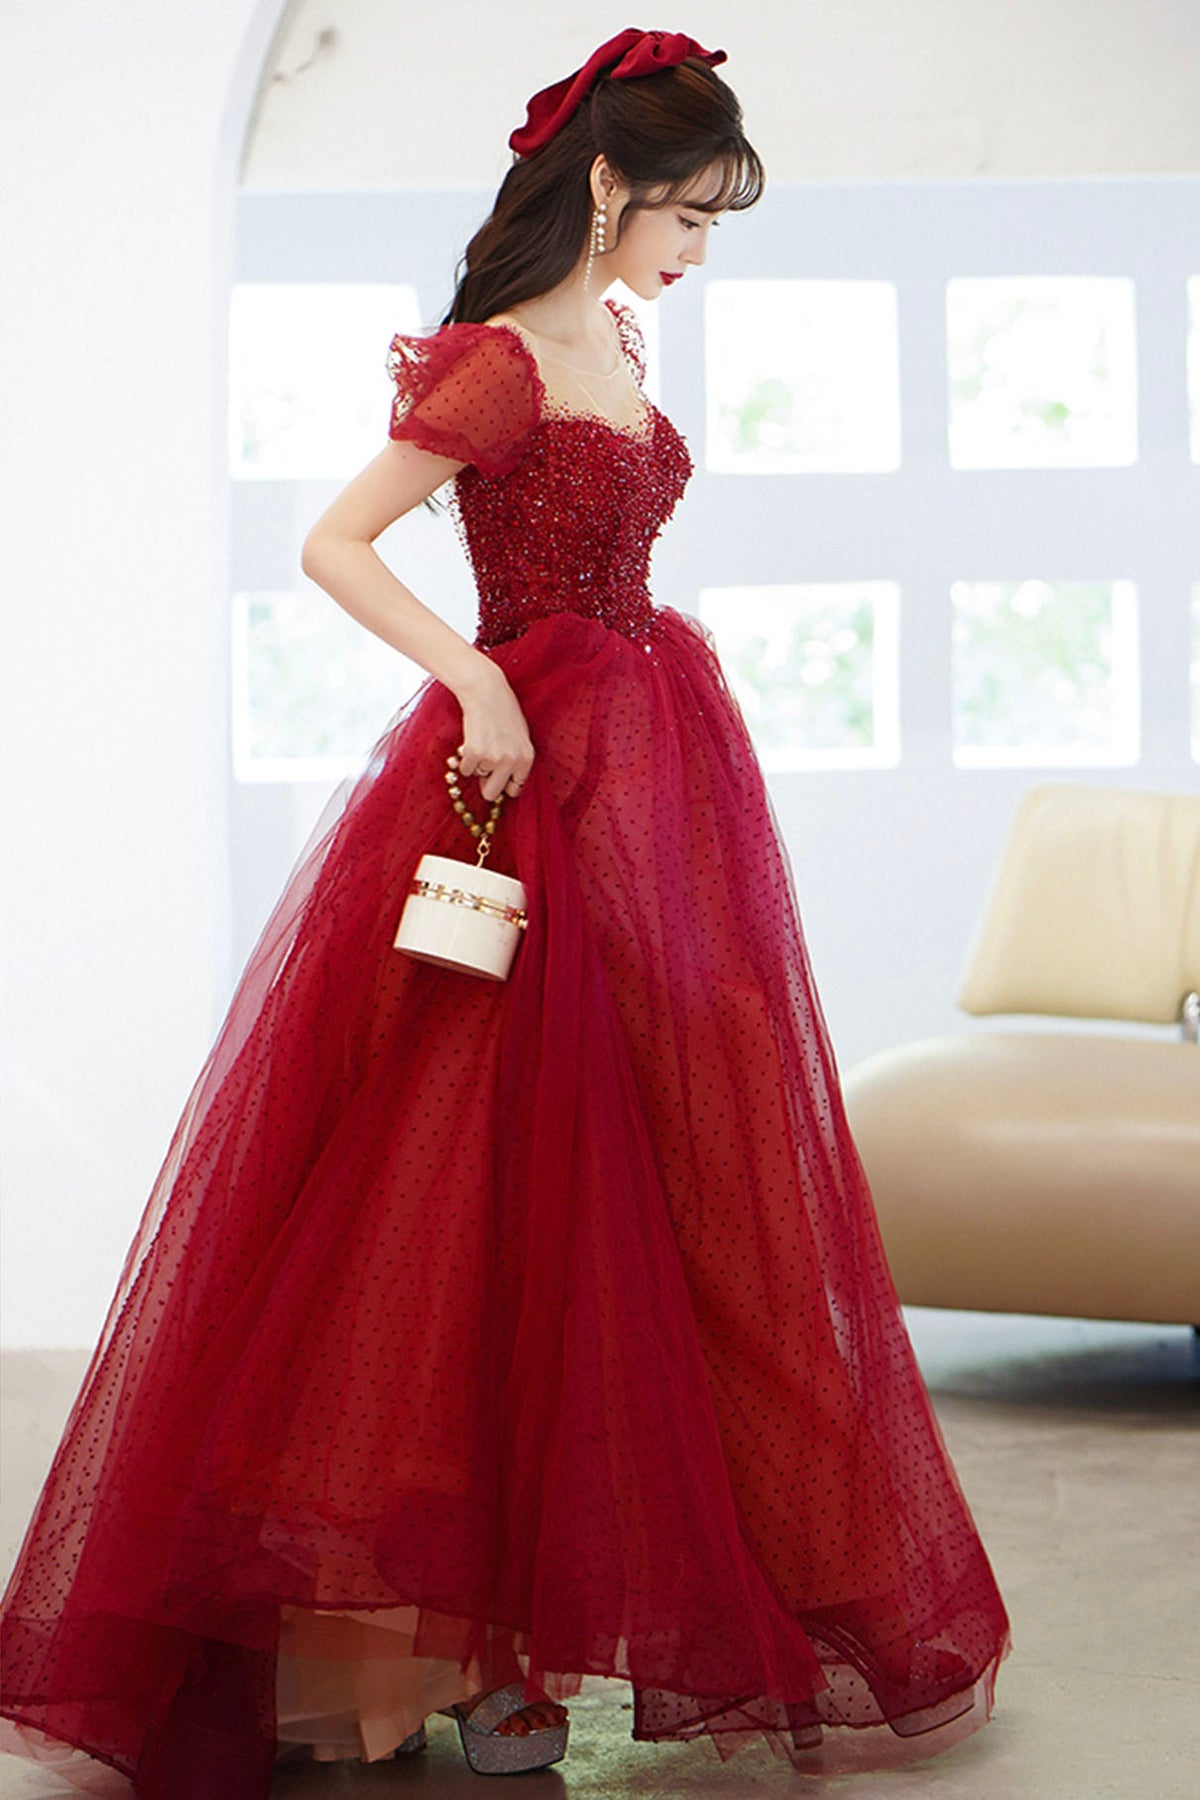 Red Scoop Neckline Tulle Long Prom Dress with Sequins, A-Line Formal Evening Dress